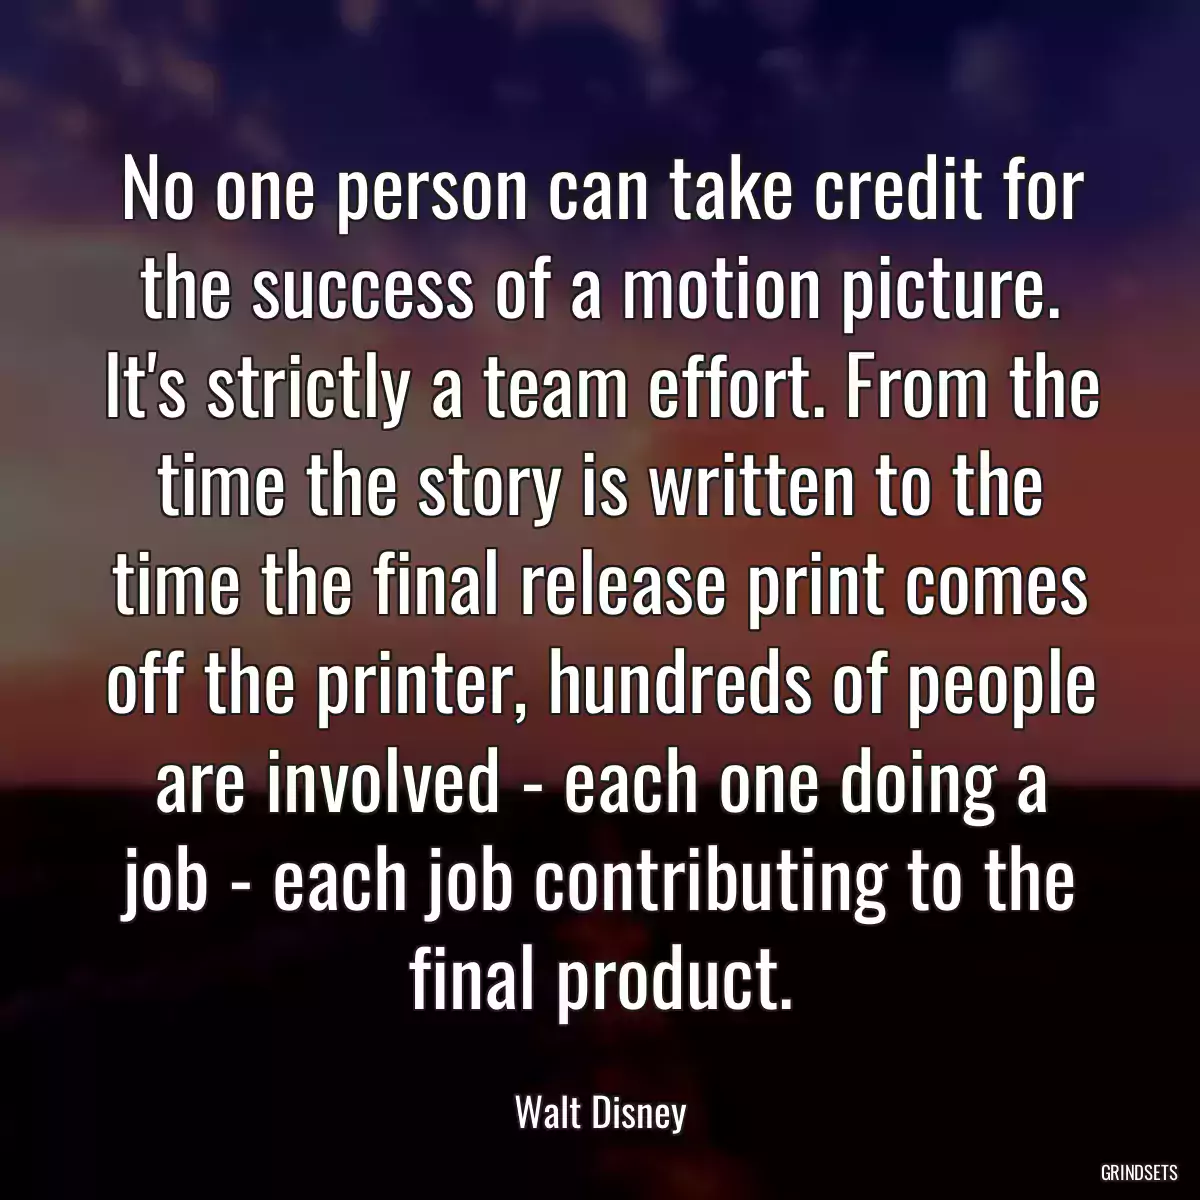 No one person can take credit for the success of a motion picture. It\'s strictly a team effort. From the time the story is written to the time the final release print comes off the printer, hundreds of people are involved - each one doing a job - each job contributing to the final product.